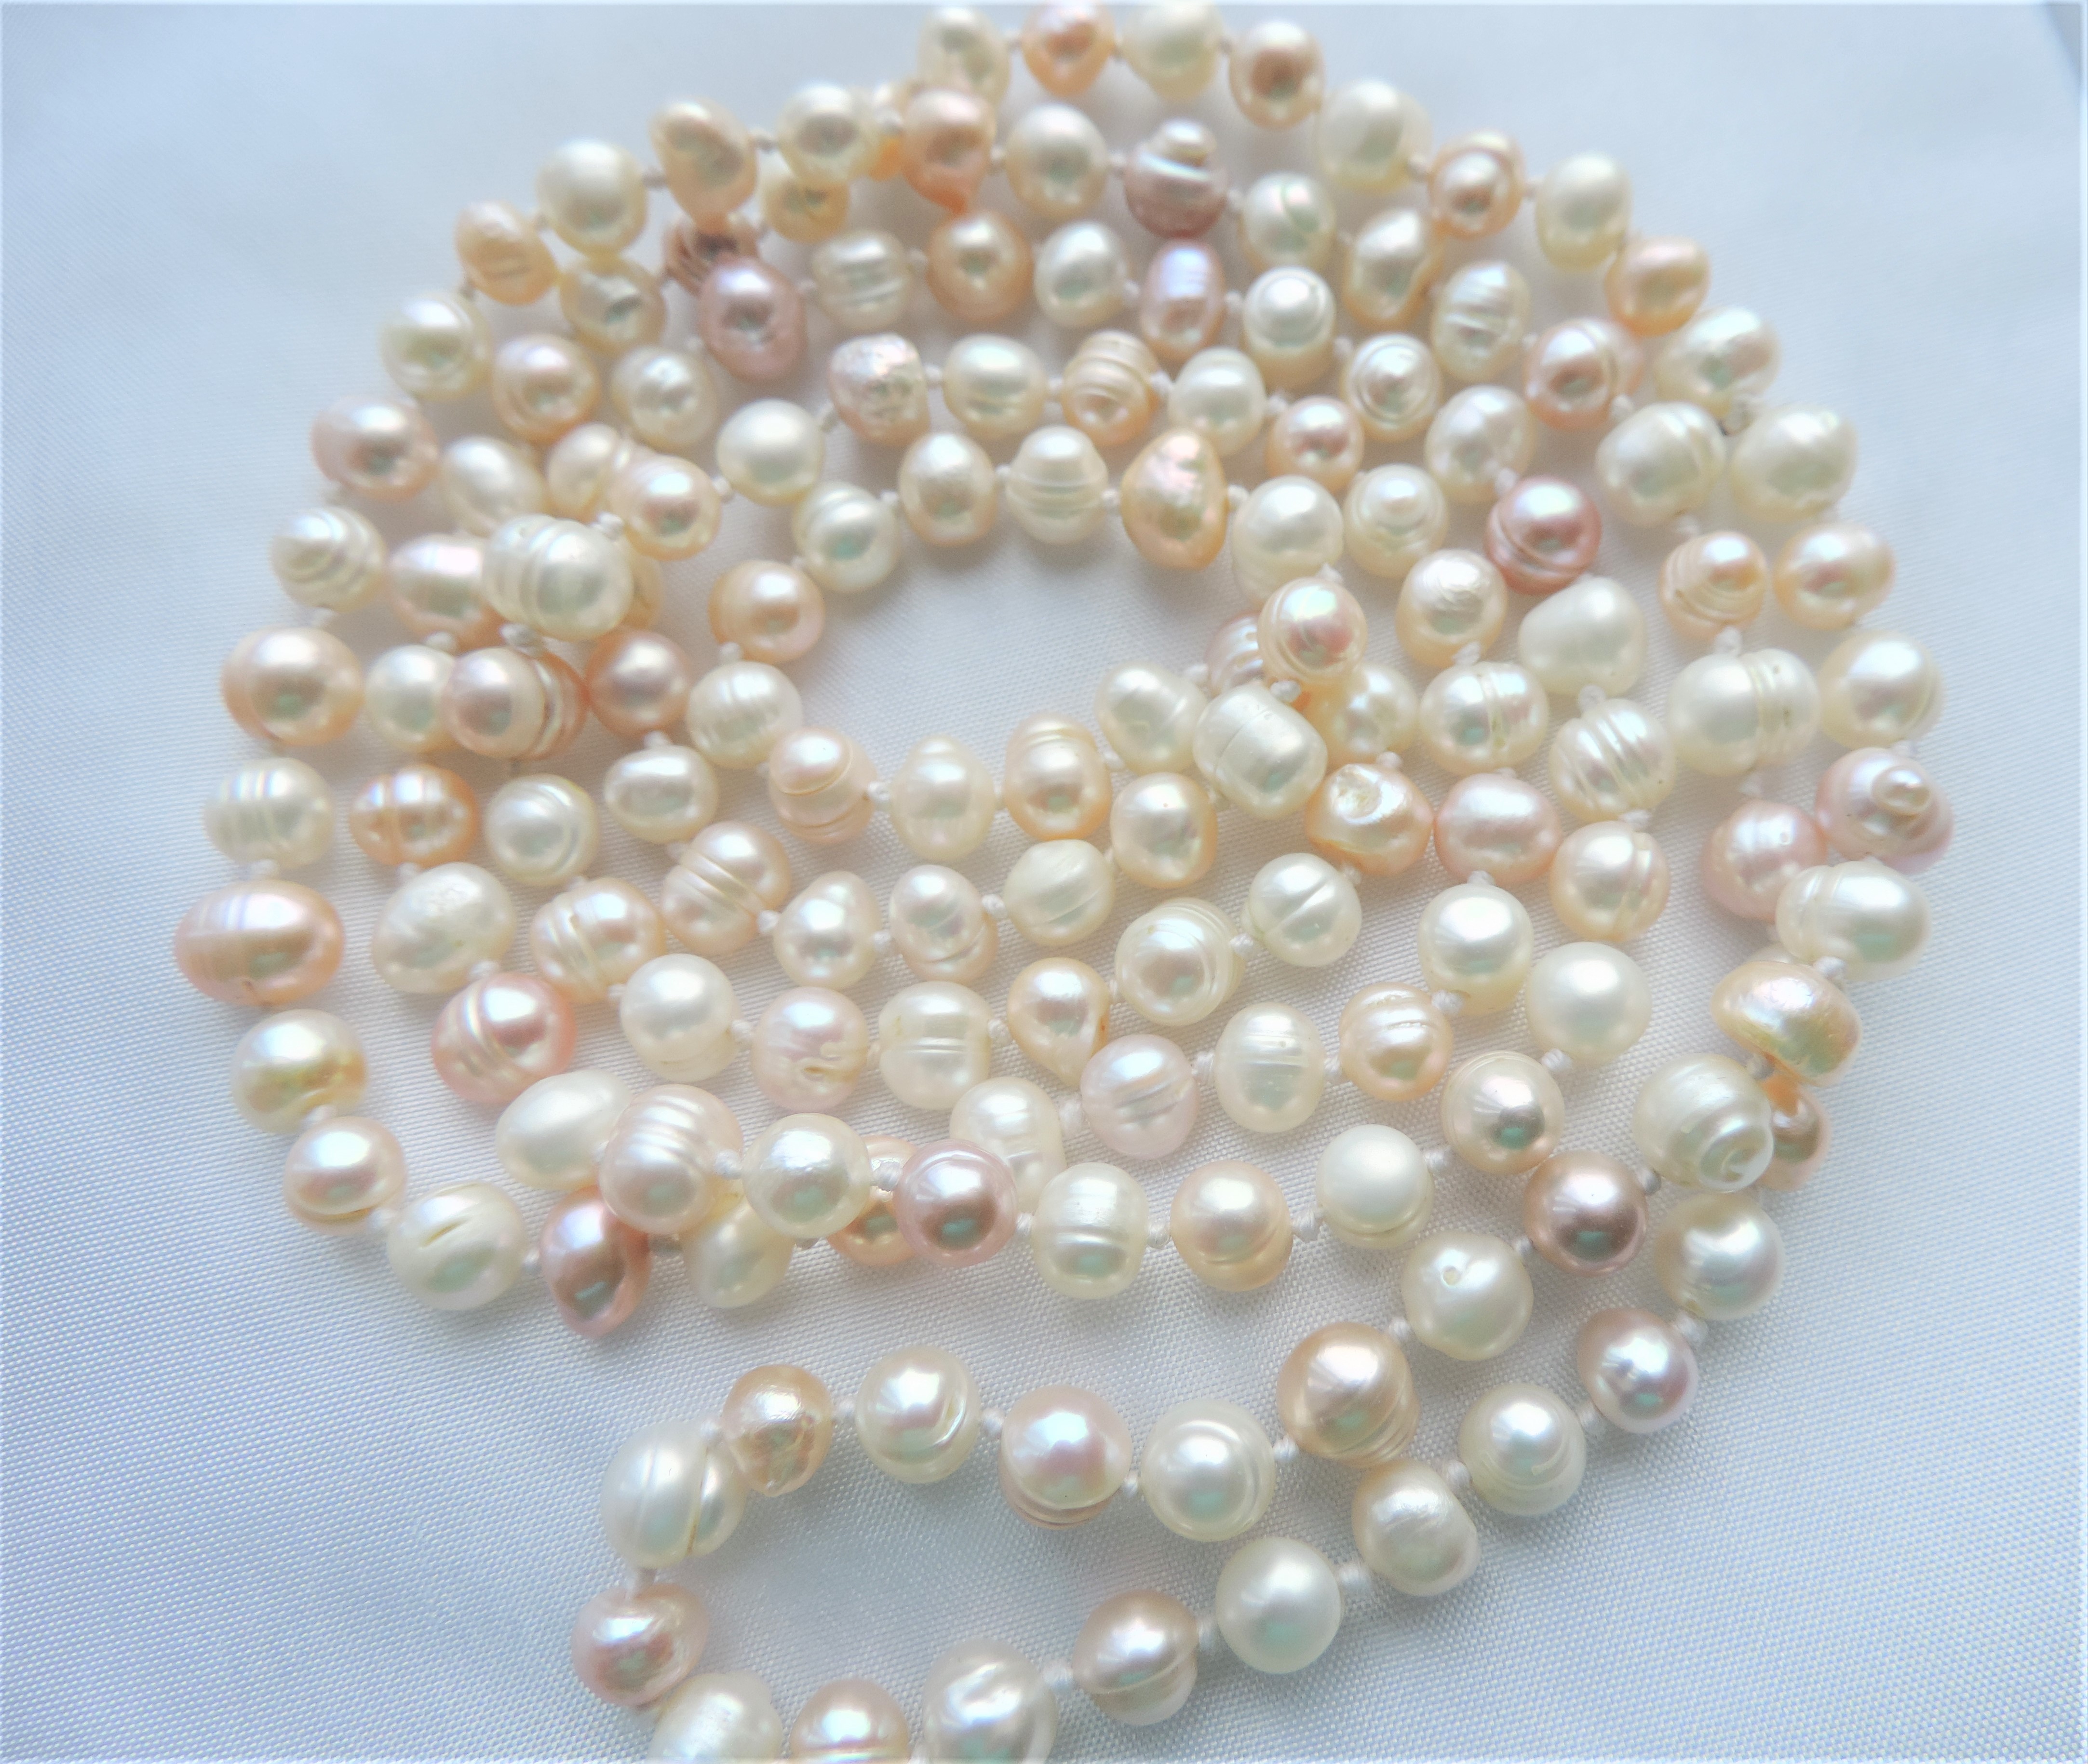 Cream, Pink & Peach Cultured Pearl Necklace 45 inches - Image 2 of 4